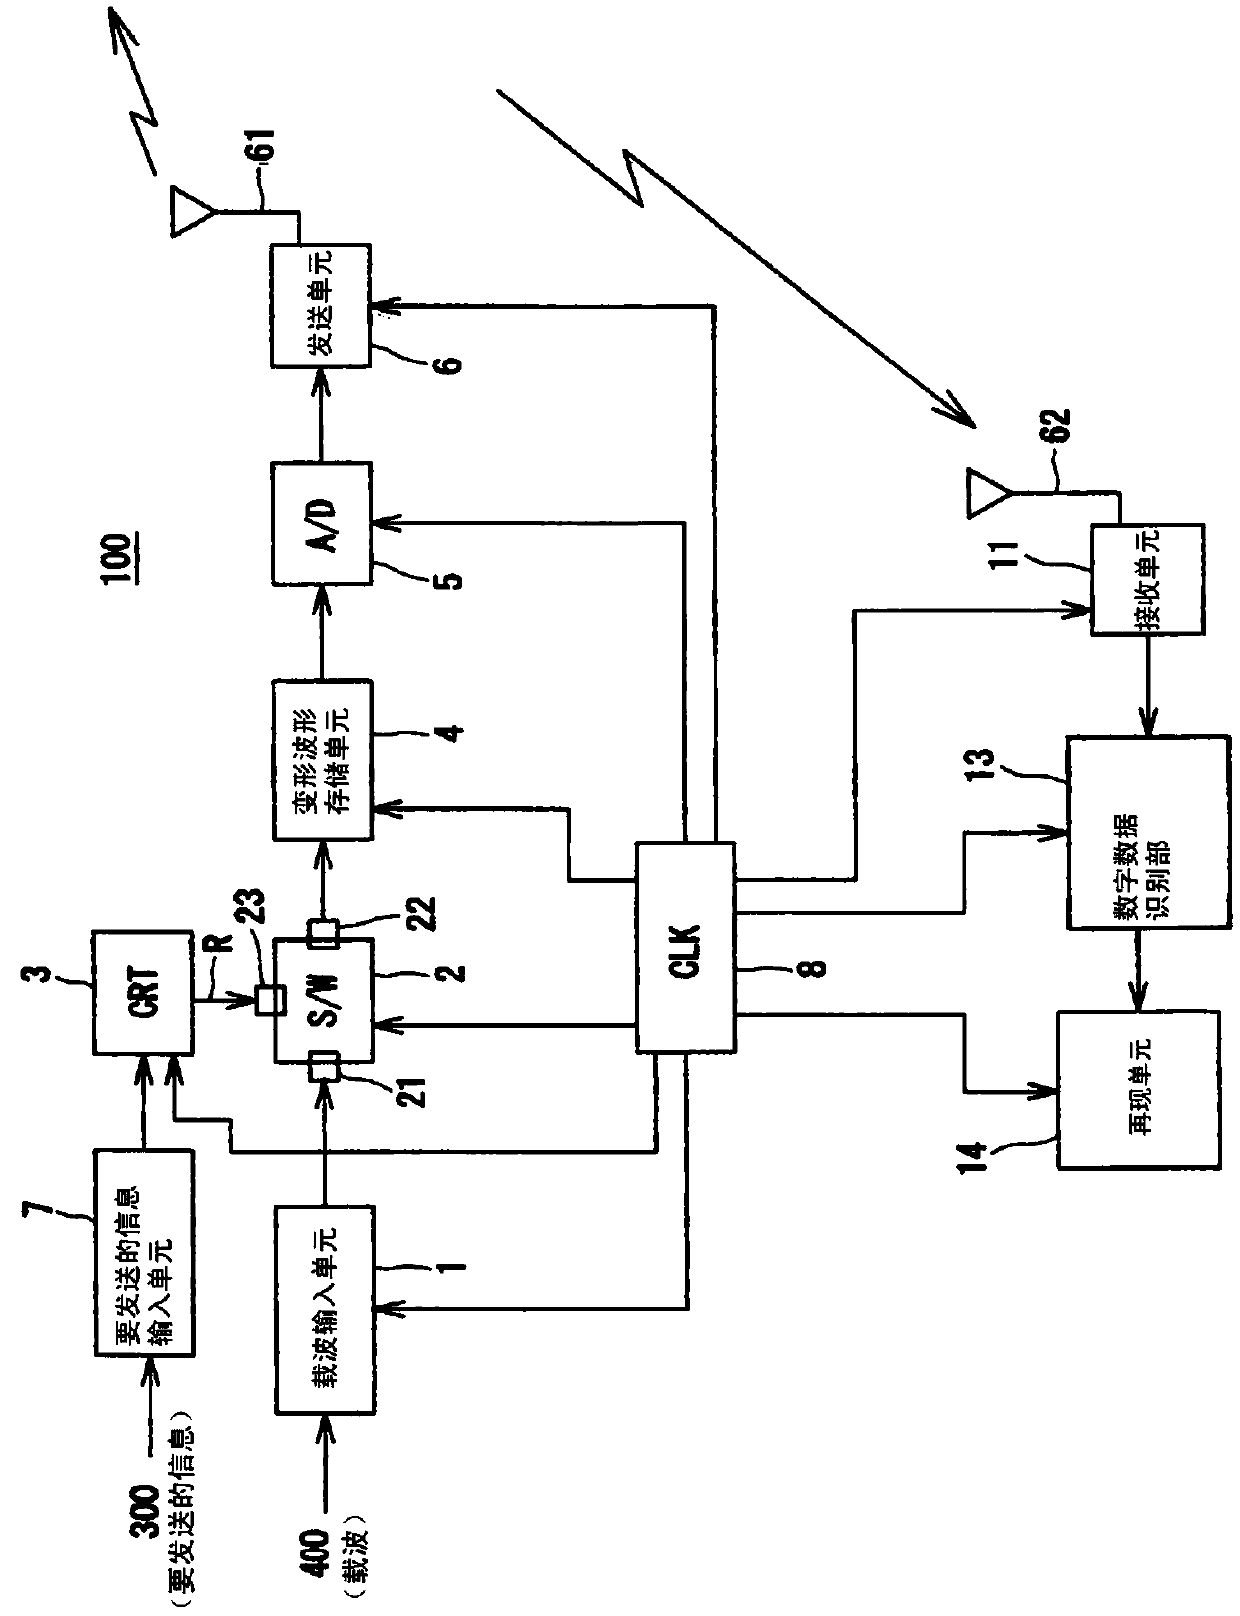 High-speed communication method and high-speed communication system